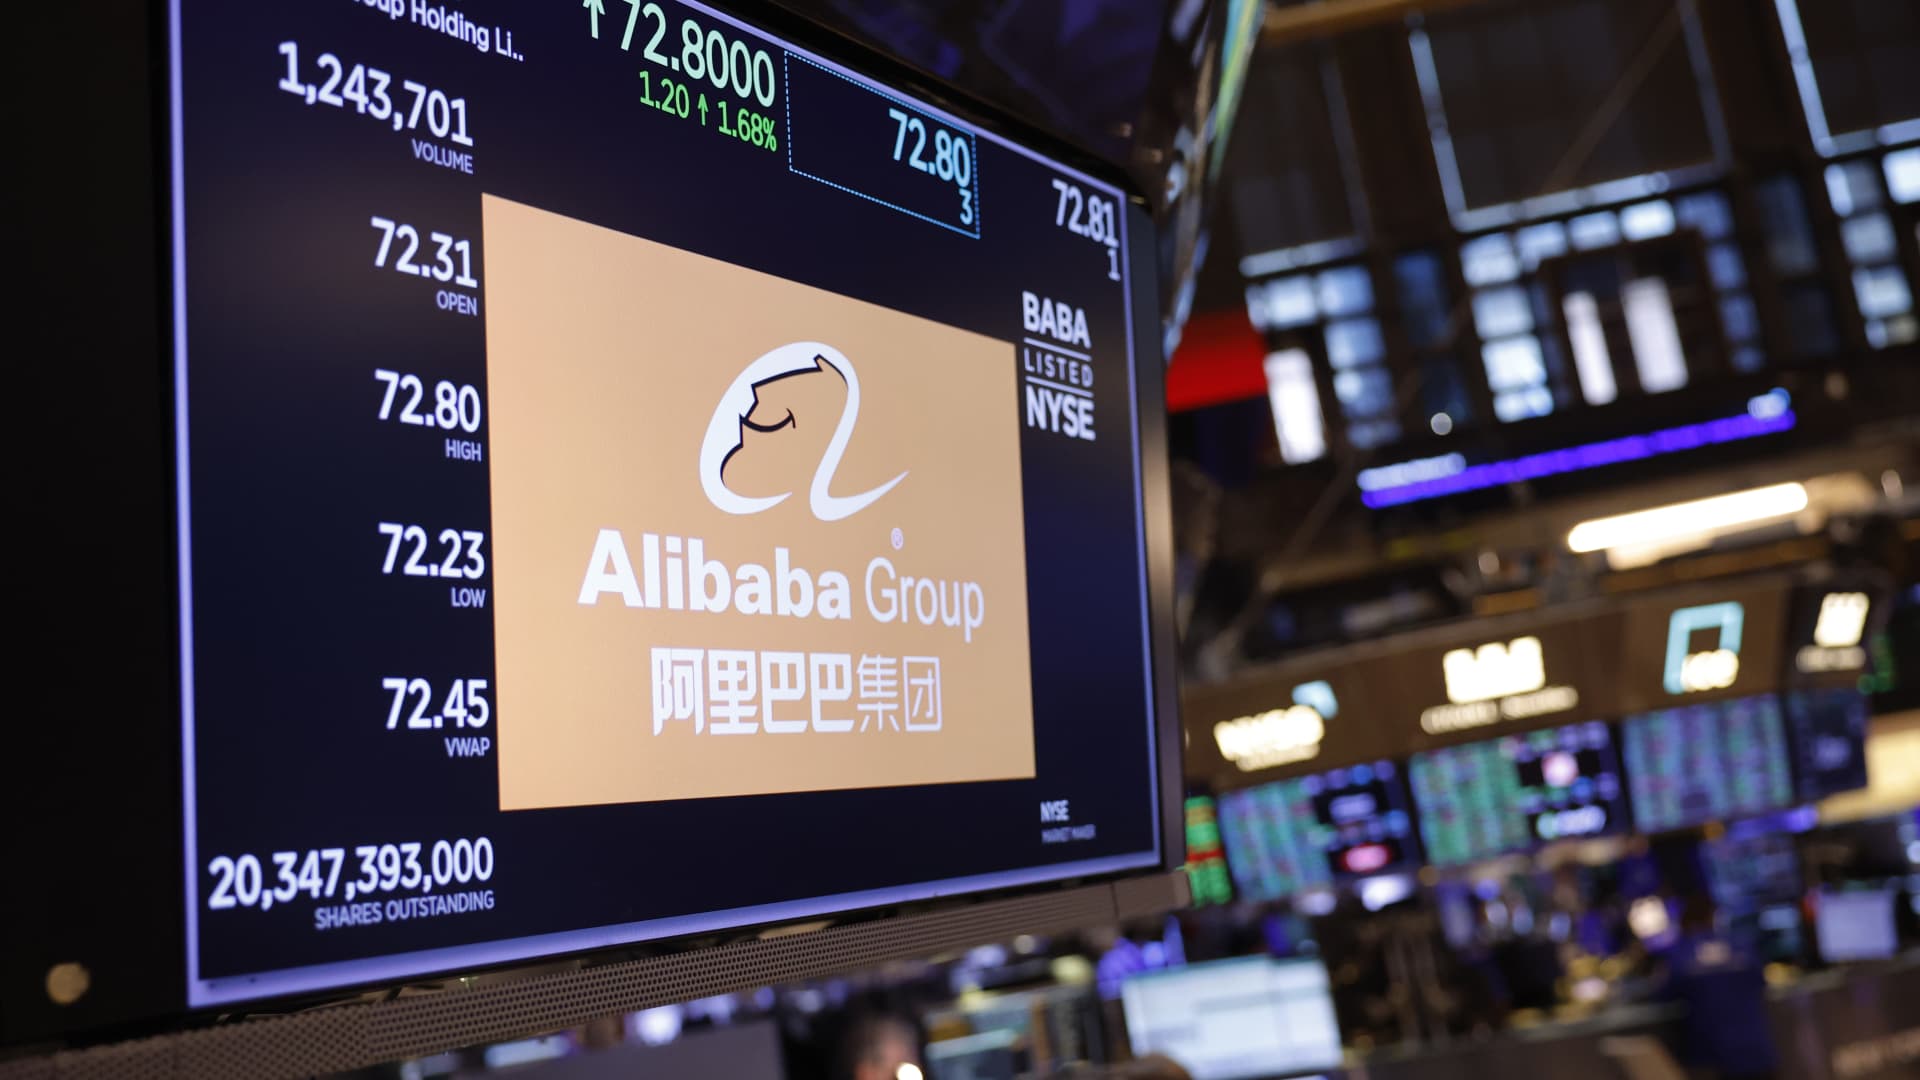 Alibaba scraps IPO of logistics unit Cainiao, says it will take full ownership